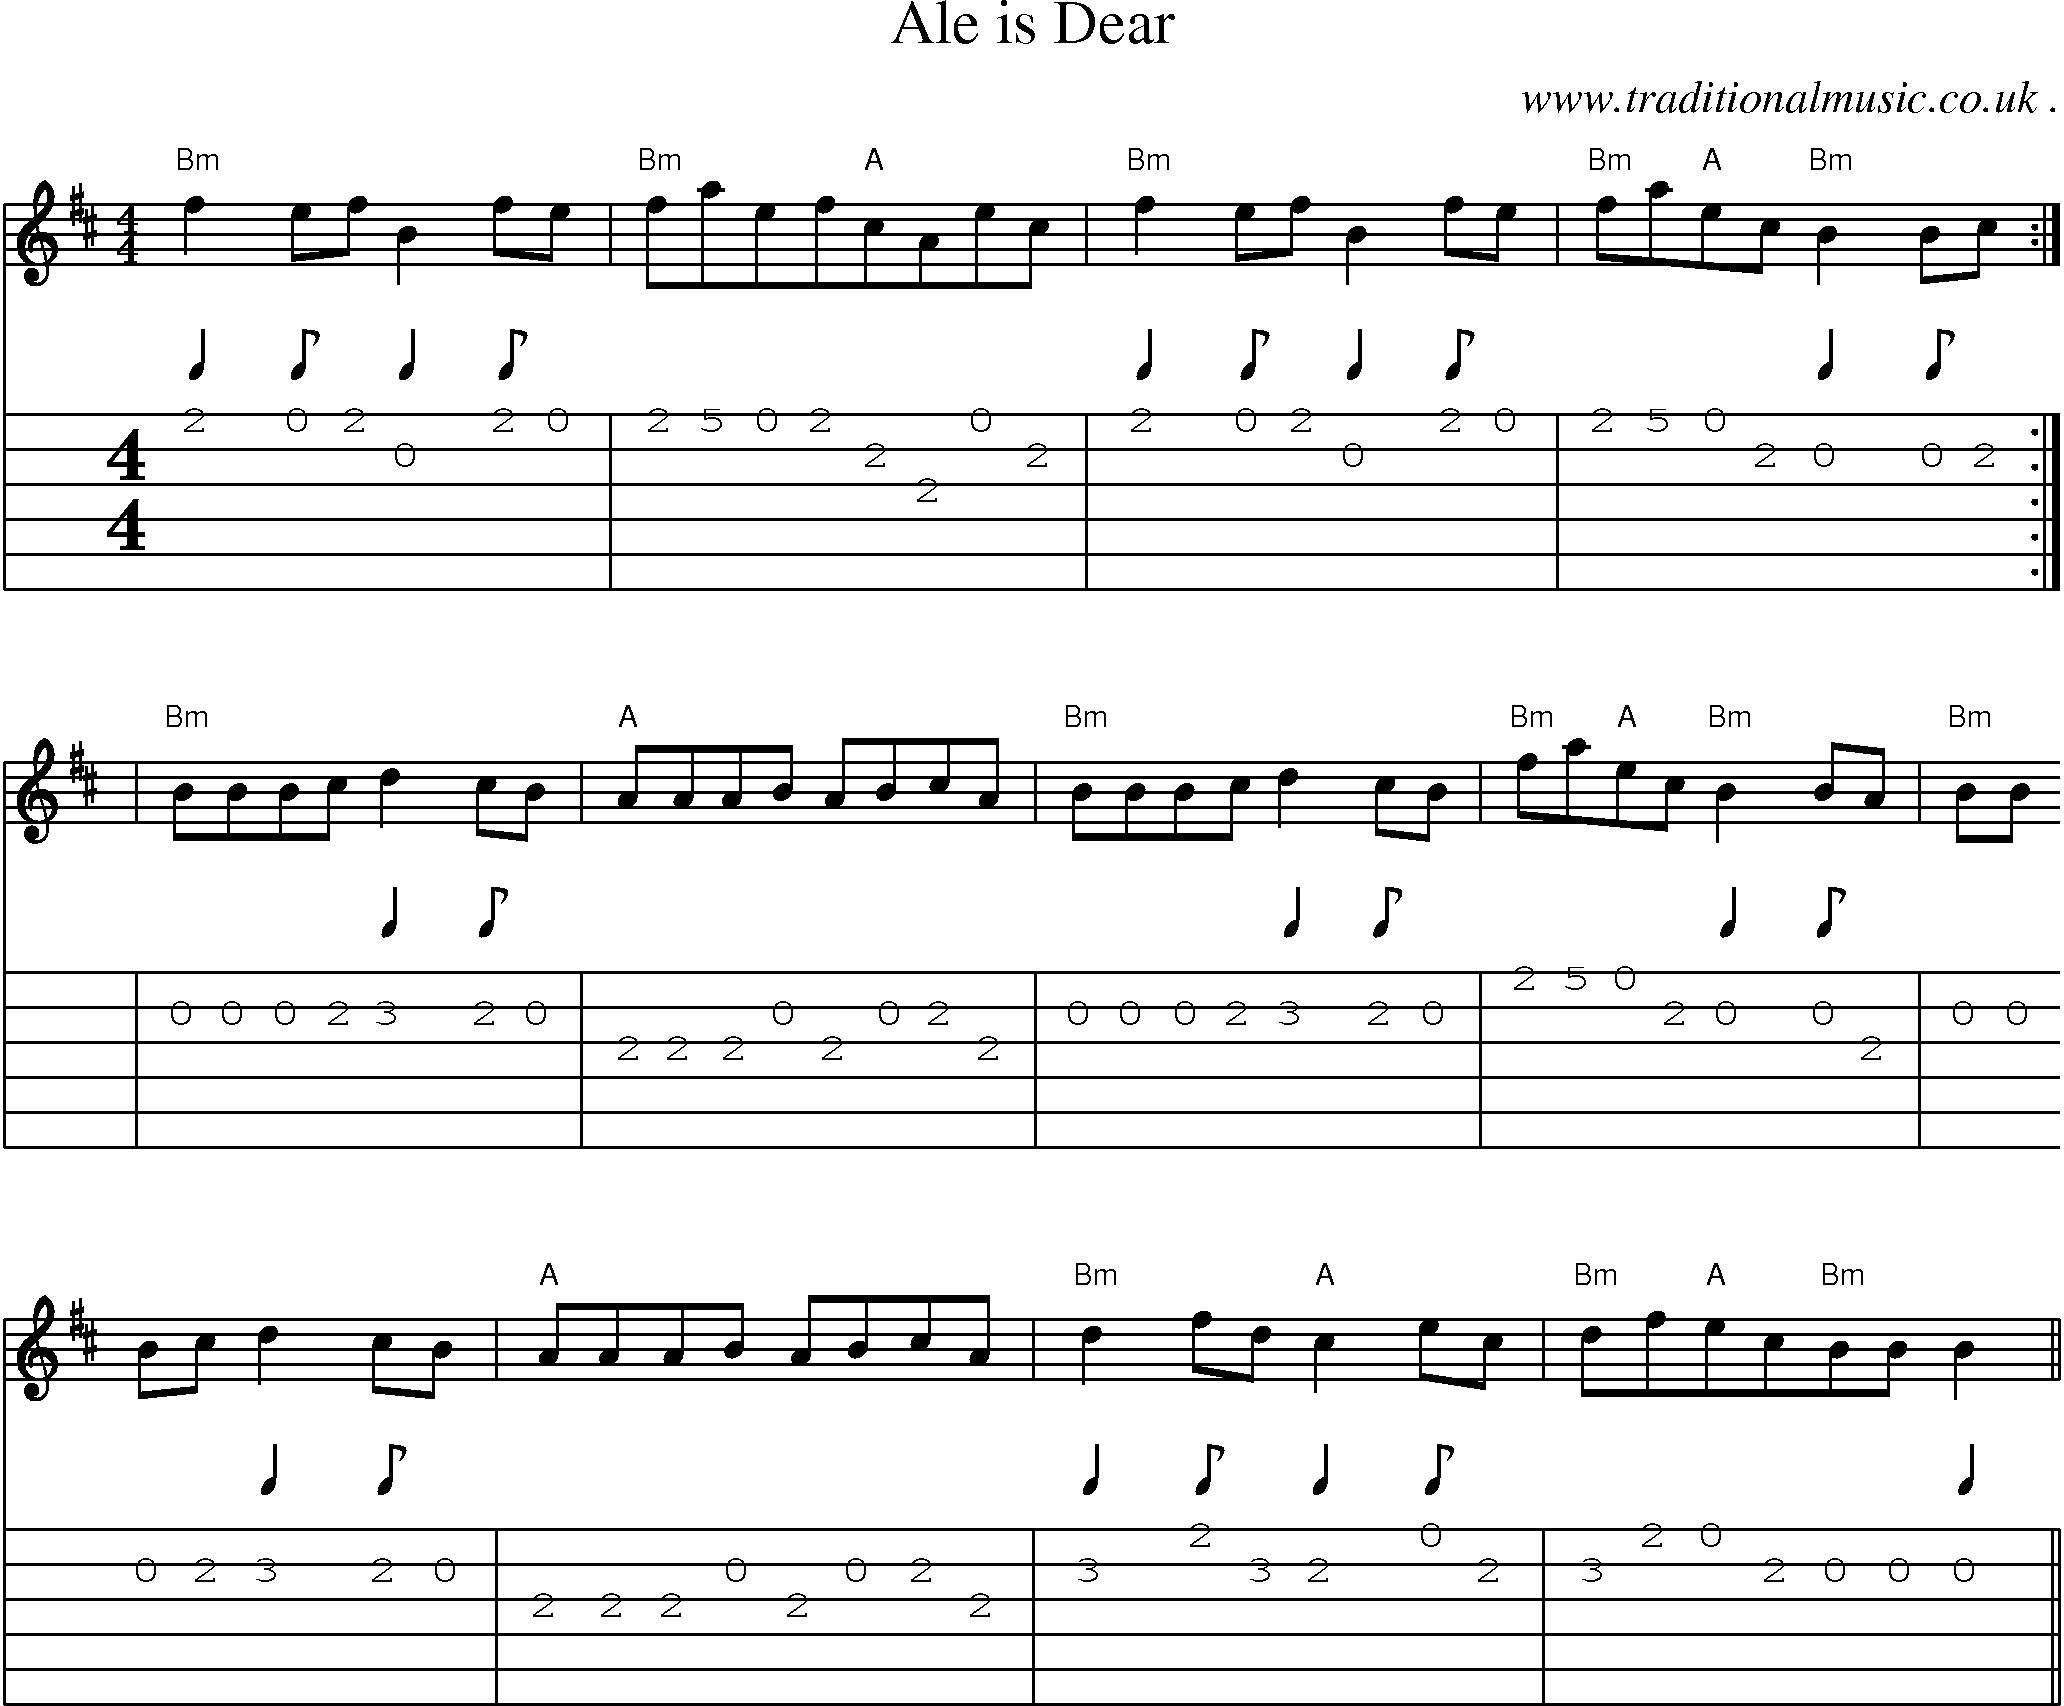 Sheet-Music and Guitar Tabs for Ale Is Dear